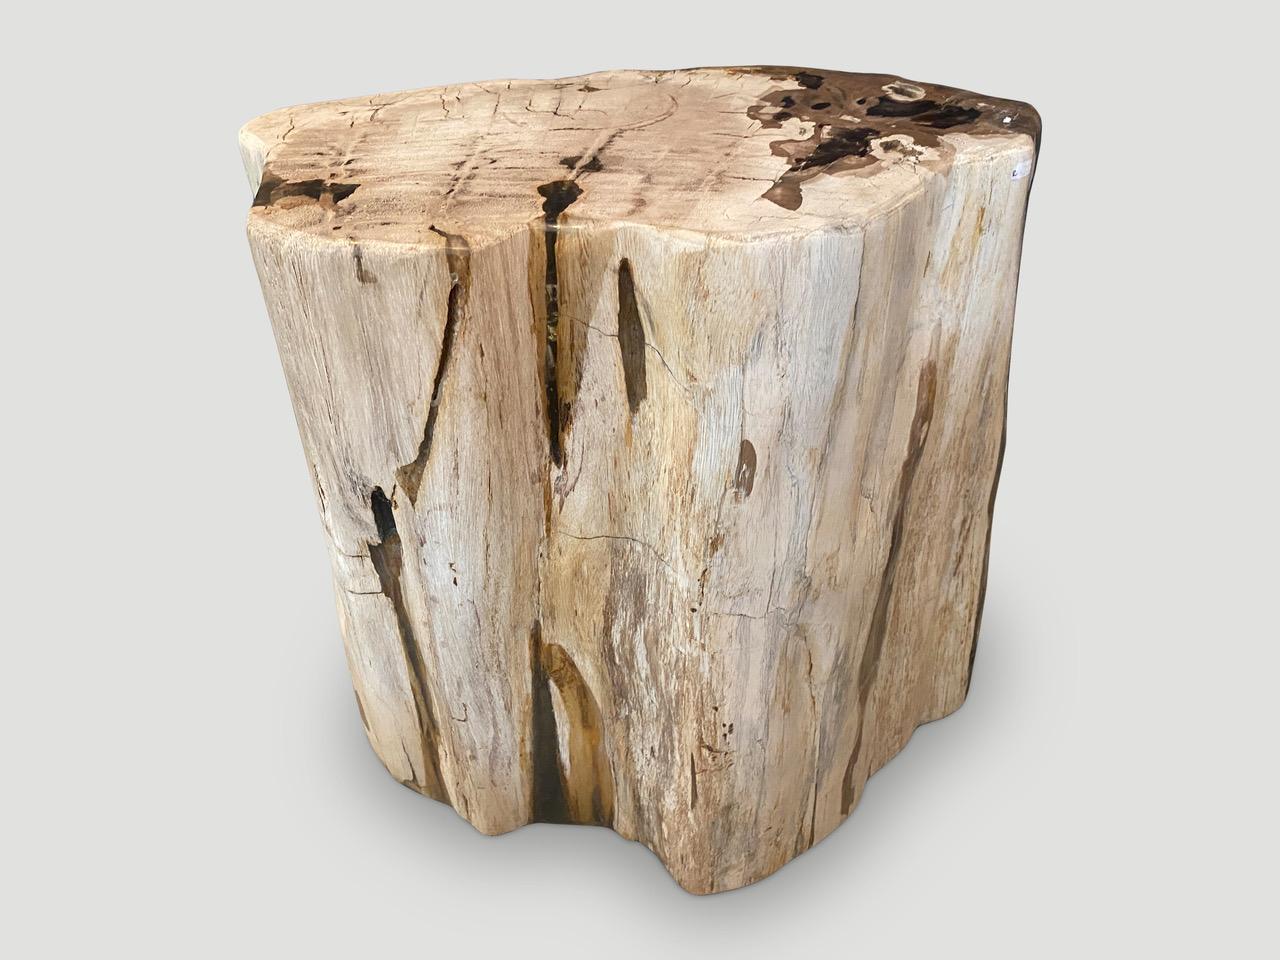 Two tone petrified wood side table with added clear resin as shown in the close up images. We have a pair cut from the same log. The price and images reflect the one shown. It’s fascinating how Mother Nature produces these exquisite 40 million year